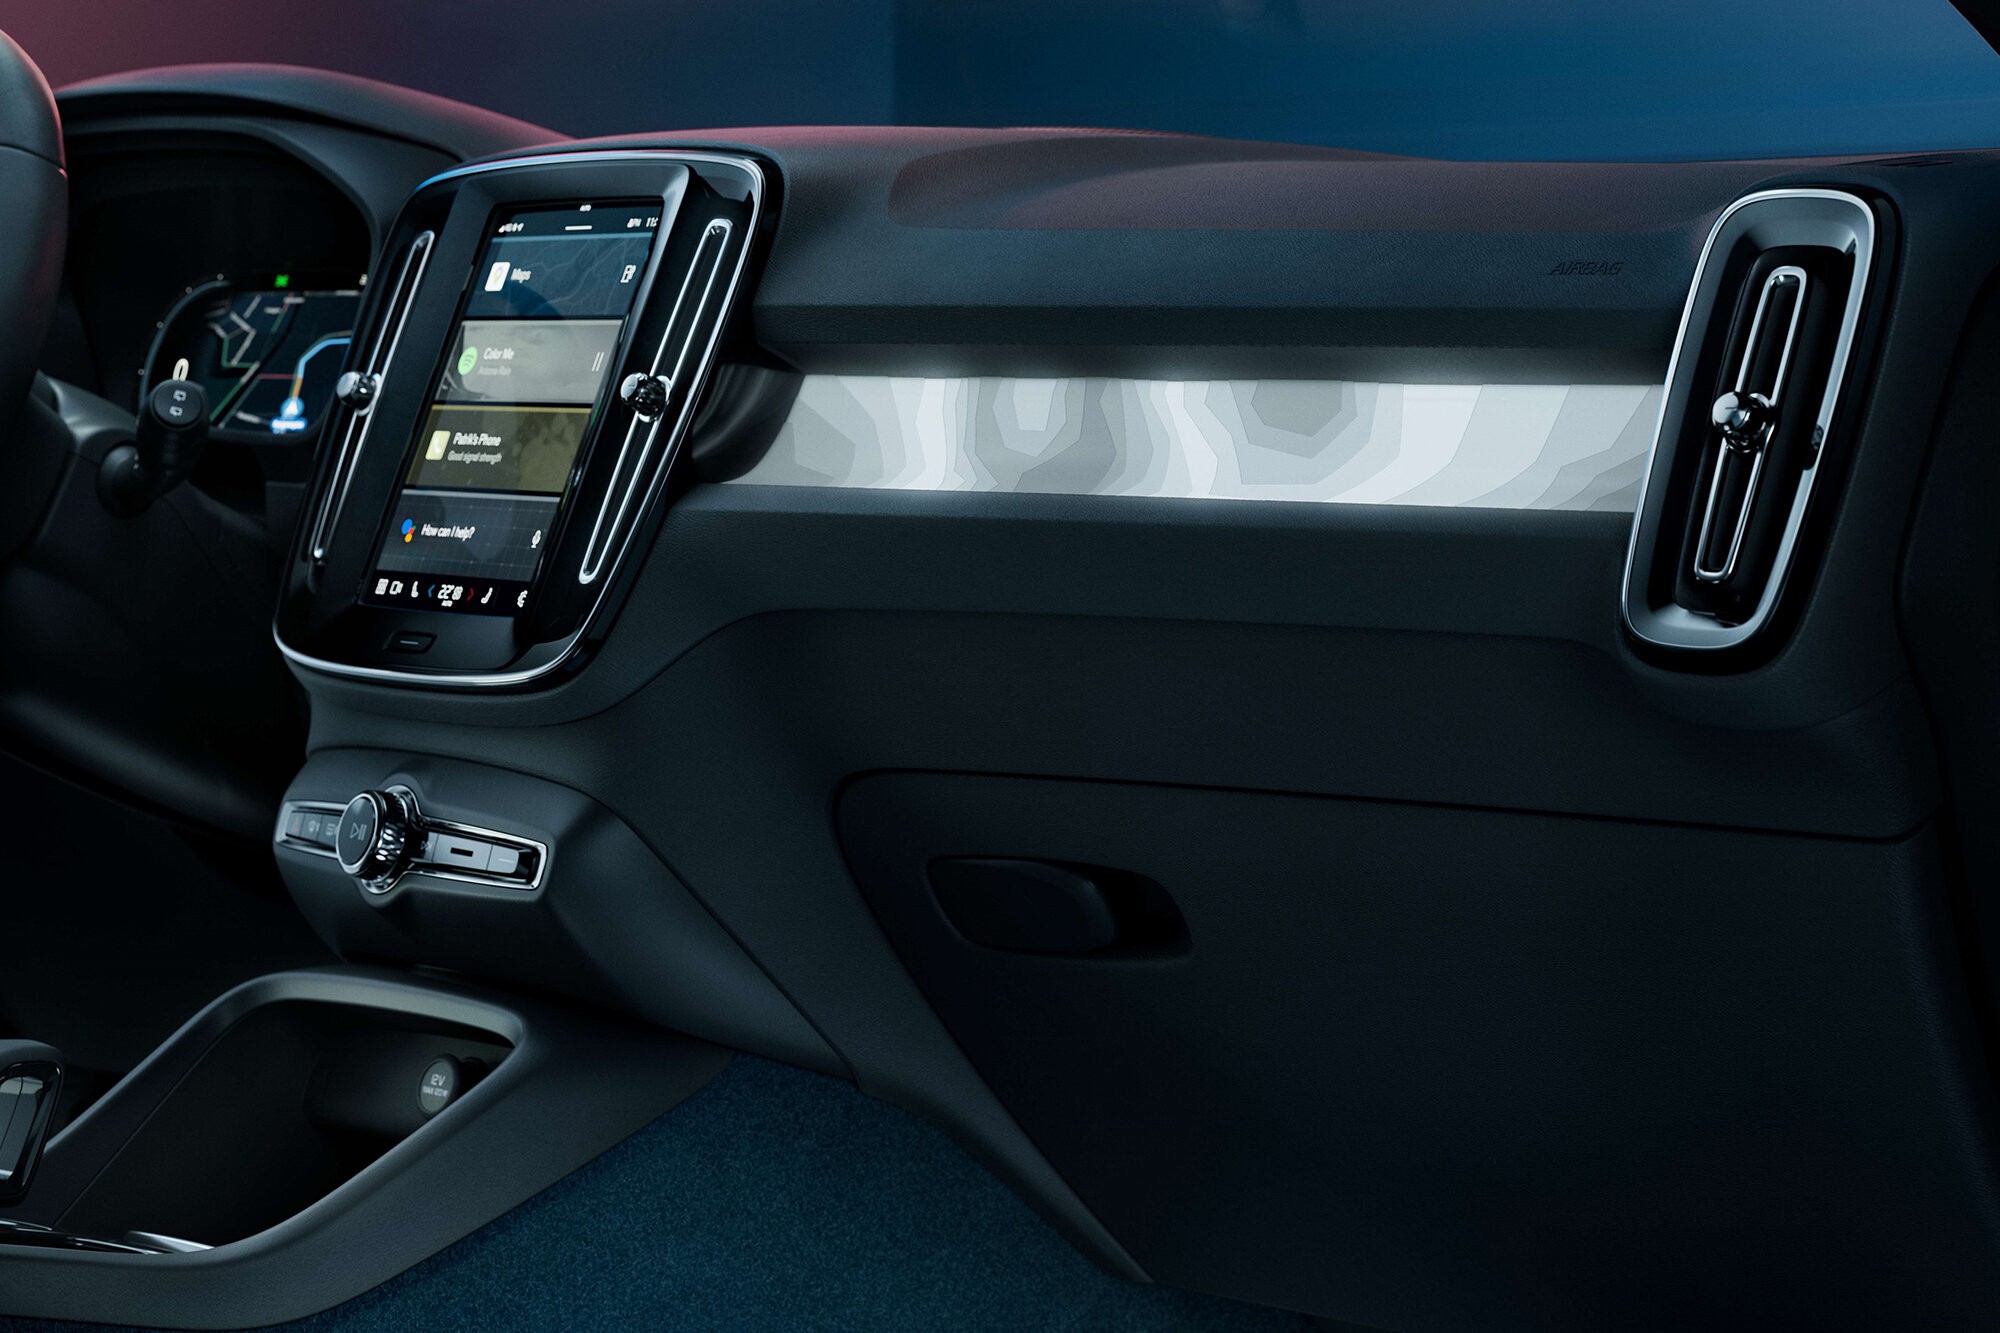 The new Infotainment system of Volvos' new pure electric C40